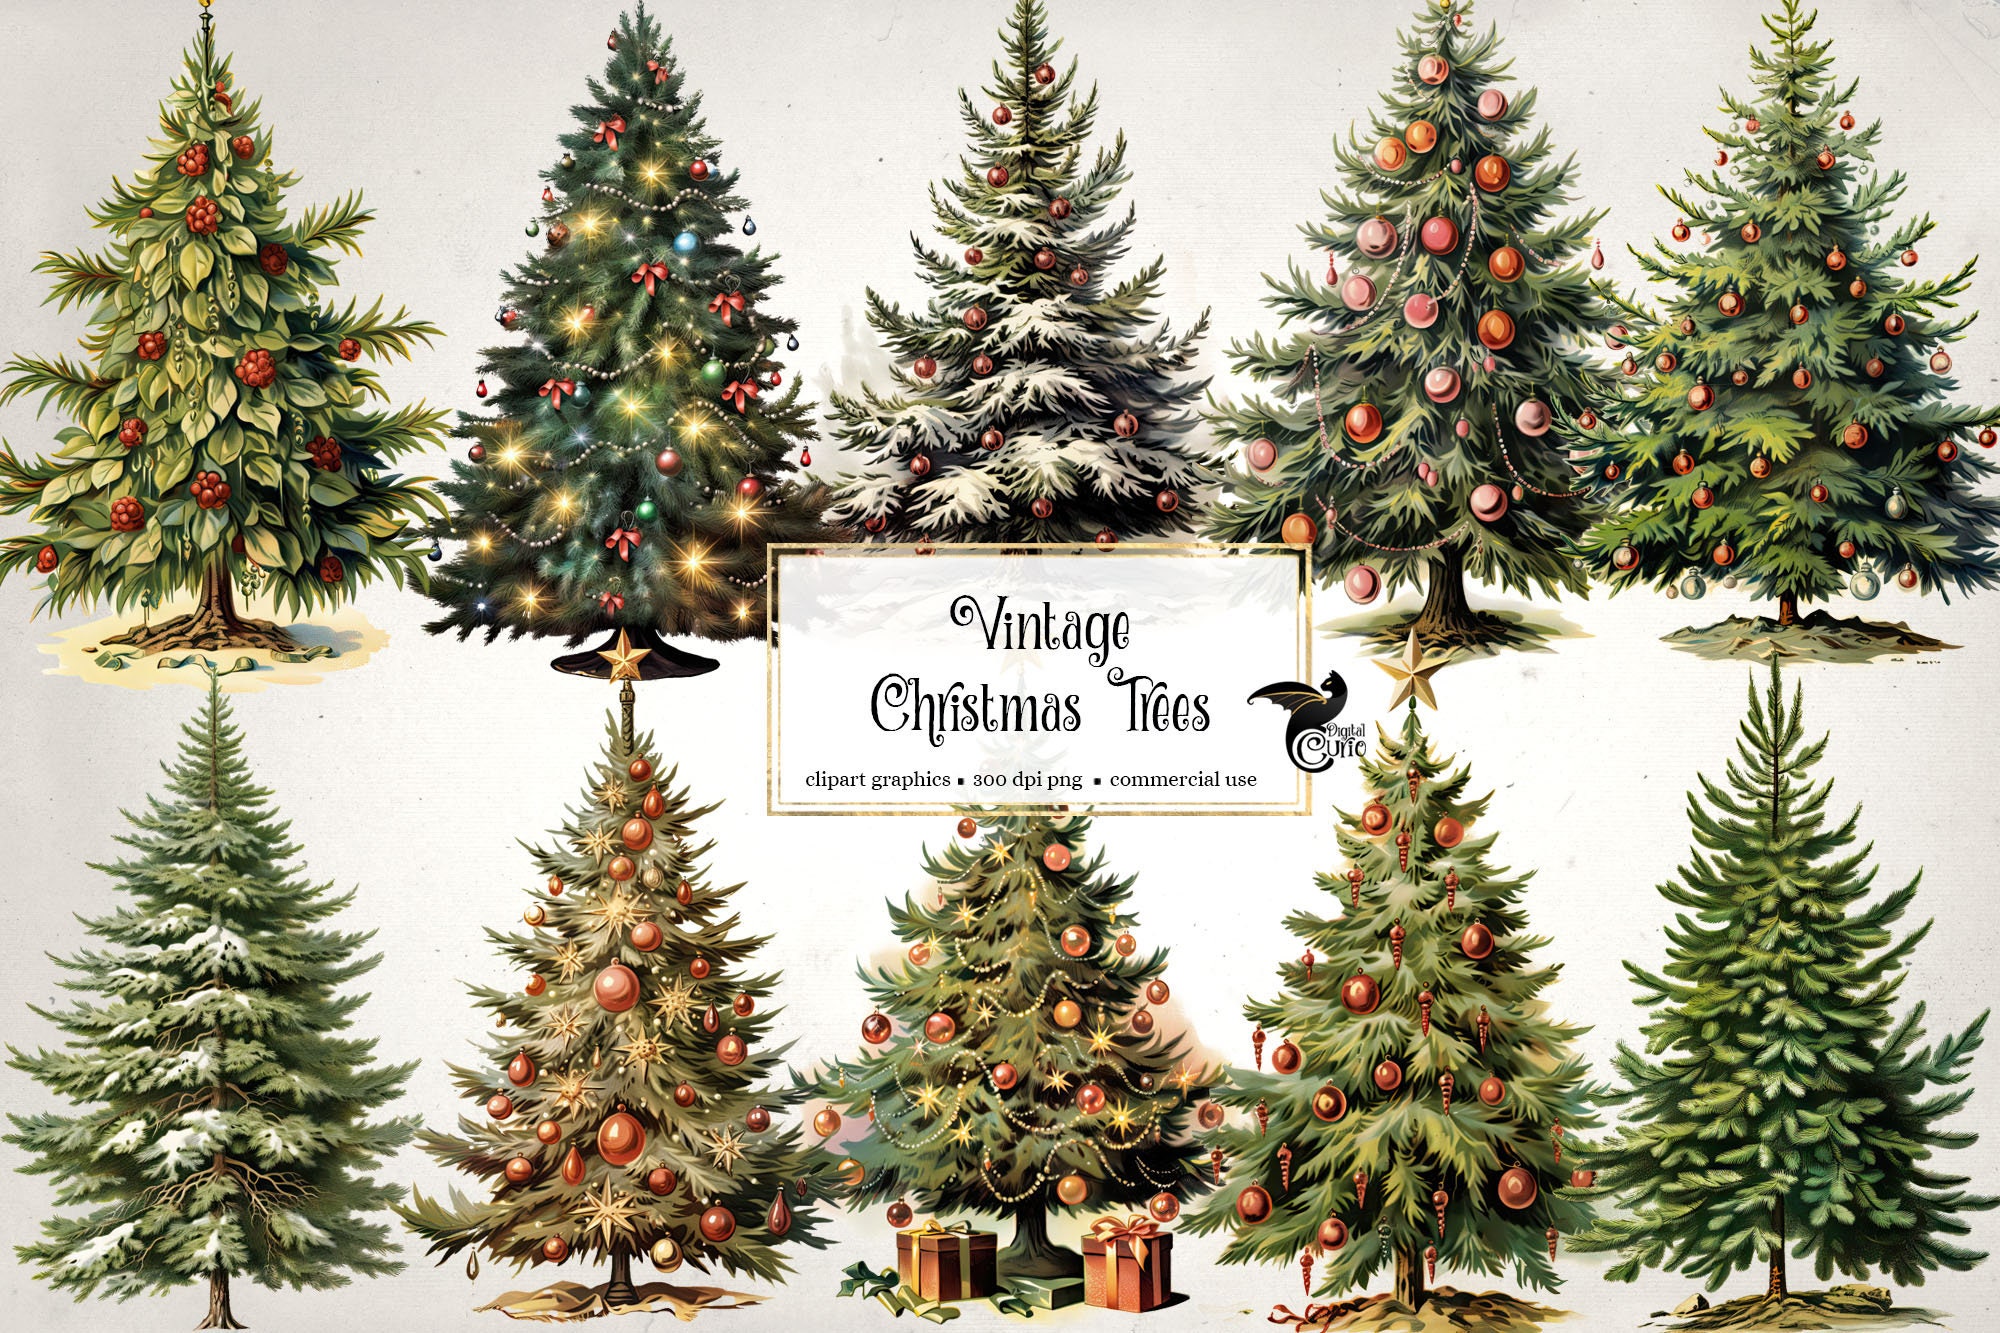 Paint Your Own 14 Inch Medium Vintage Christmas Tree w/ Electrical